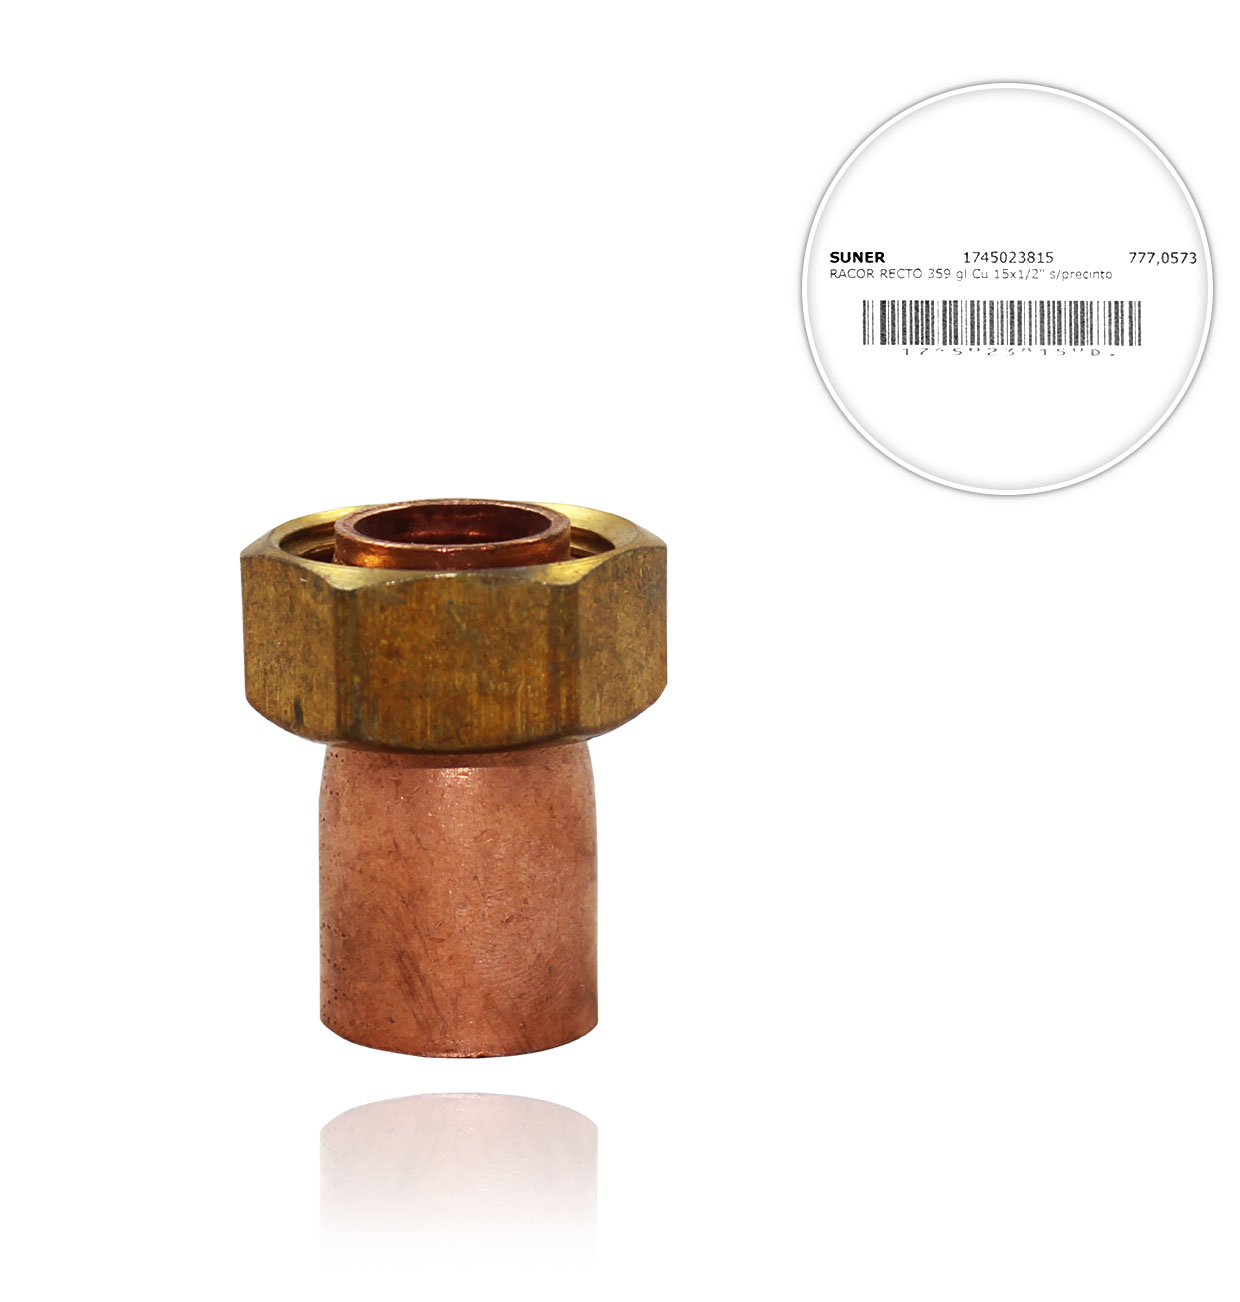 359 gl Cu 15x1/2" STRAIGHT FITTING without seal